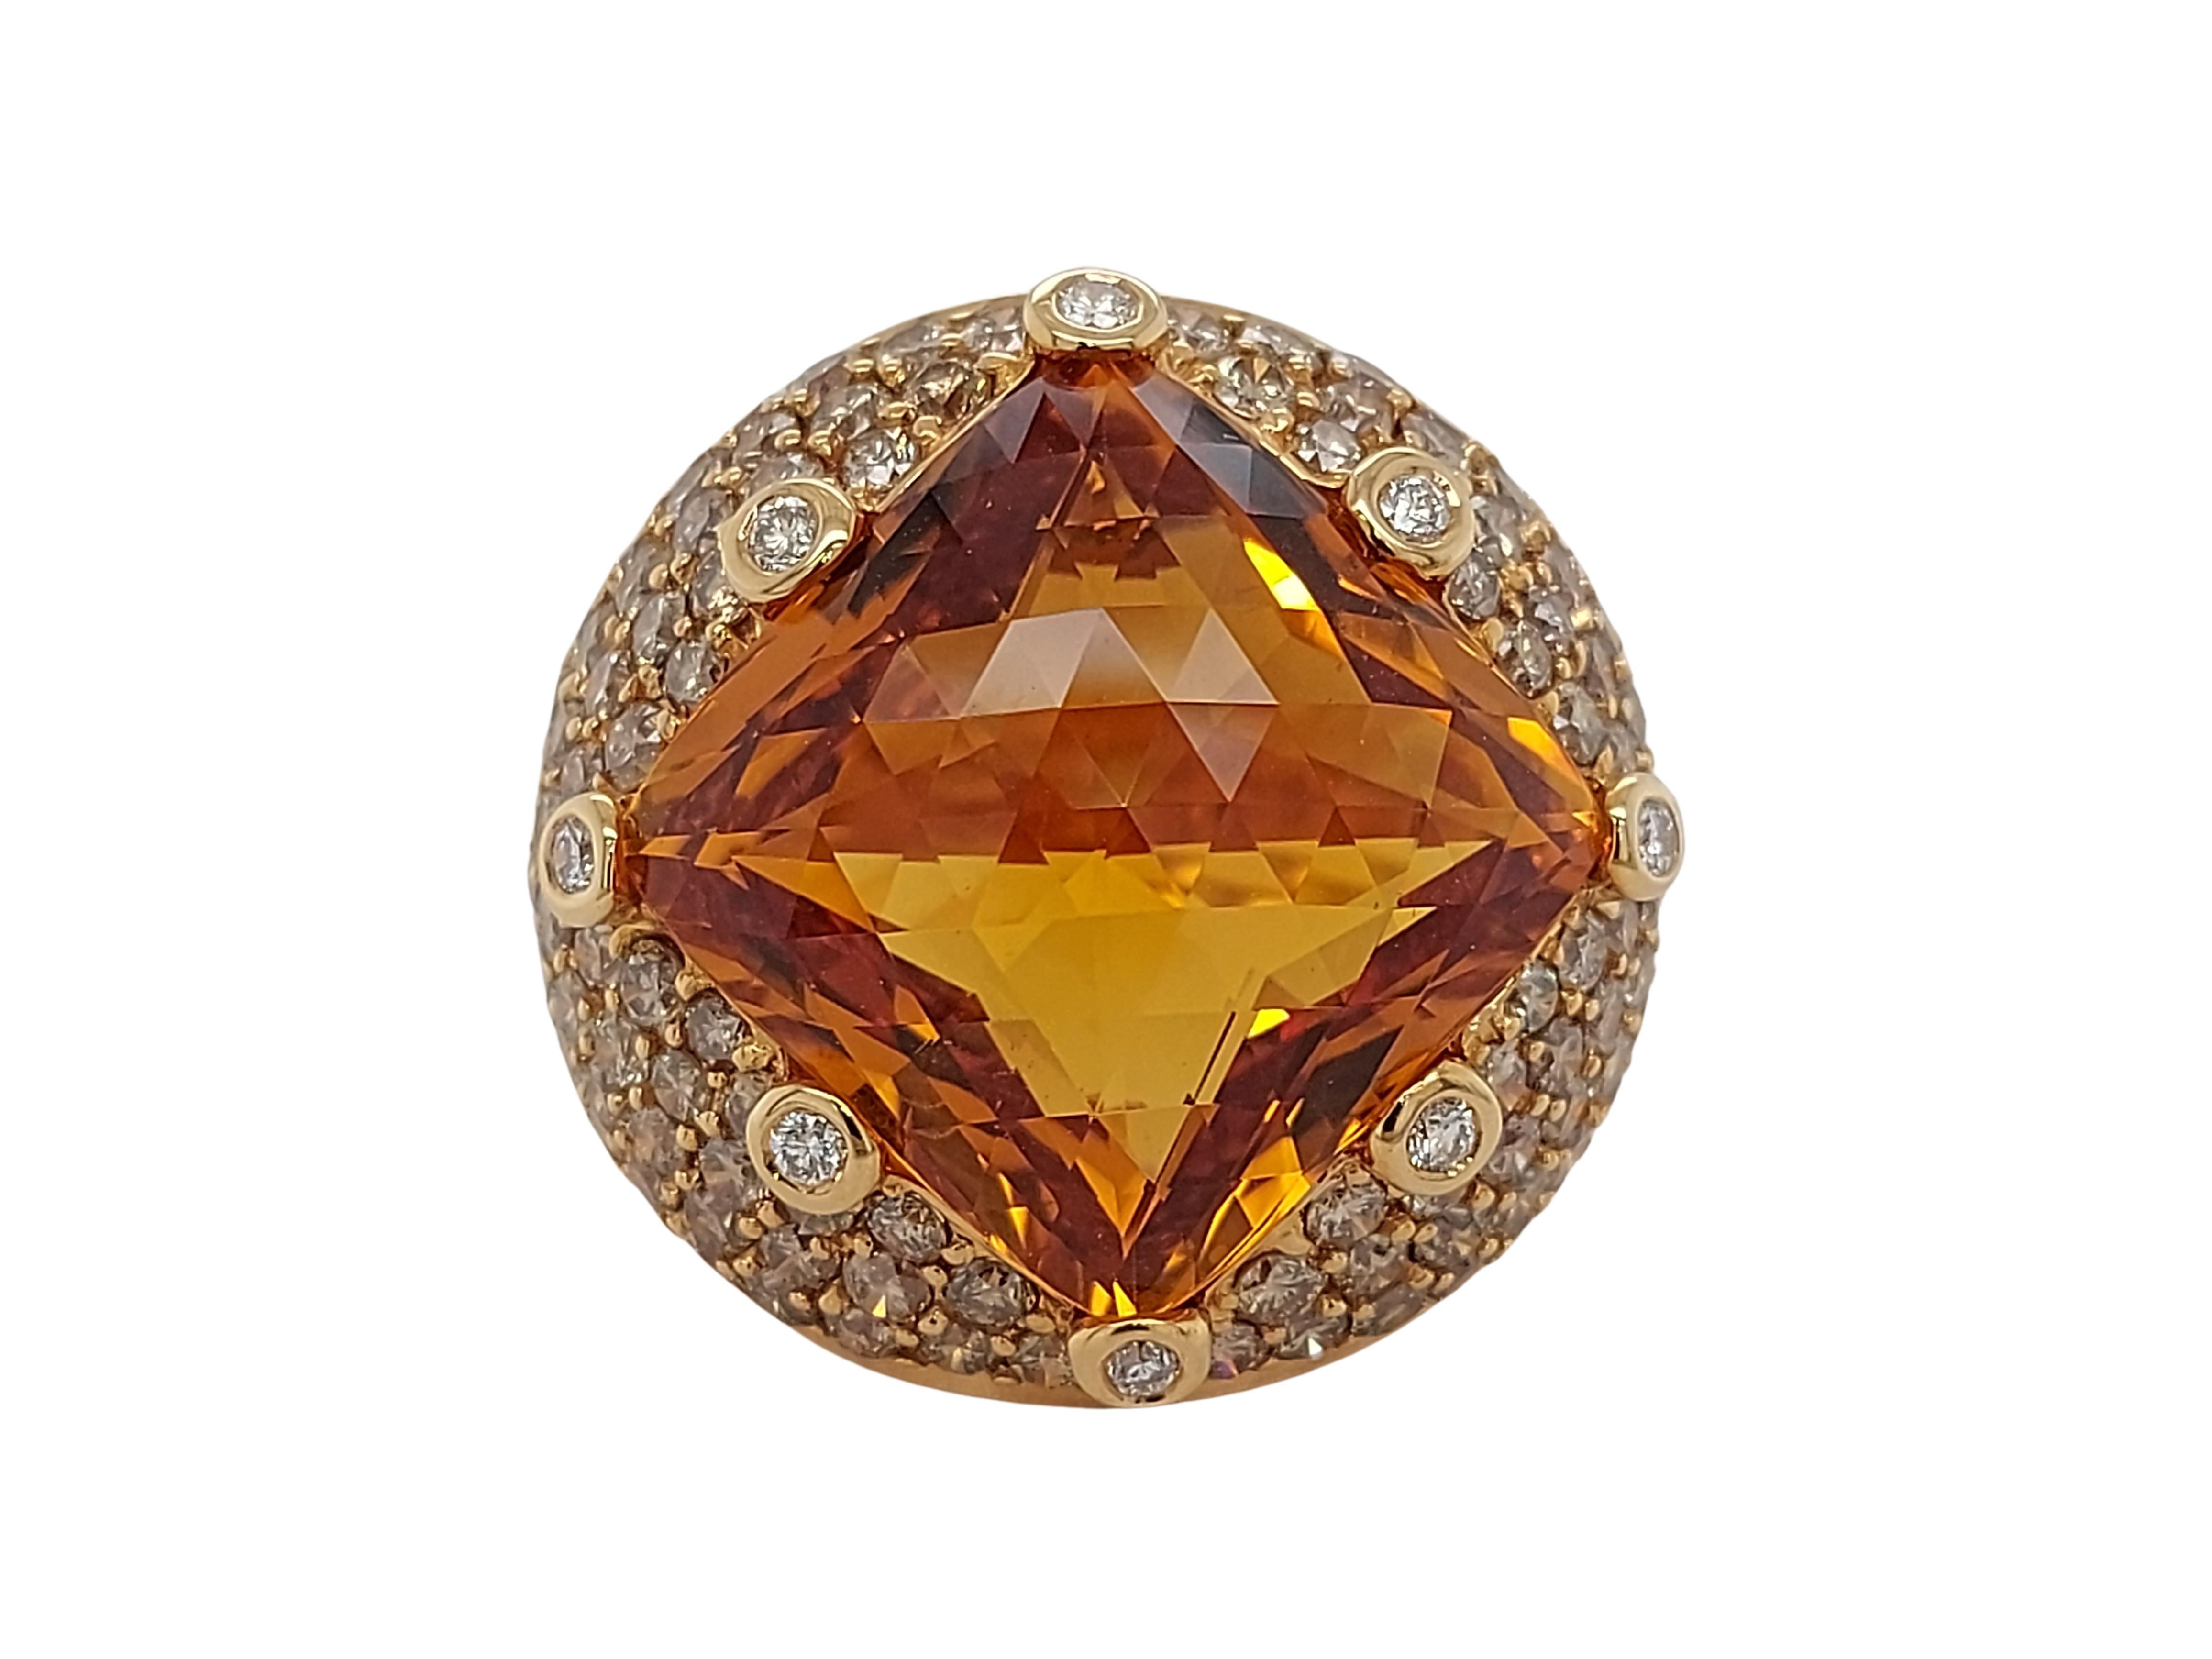 Beautiful 18kt Gold ring With Large Citrine and Diamonds 

Citrine: Beautiful Natural Citrine stone of 22.50 Ct

Diamonds: White brilliant cut diamonds together approx. 0.21 Ct G SI, brown diamonds together ca. 5.05 Ct

Material: 18kt solid pink